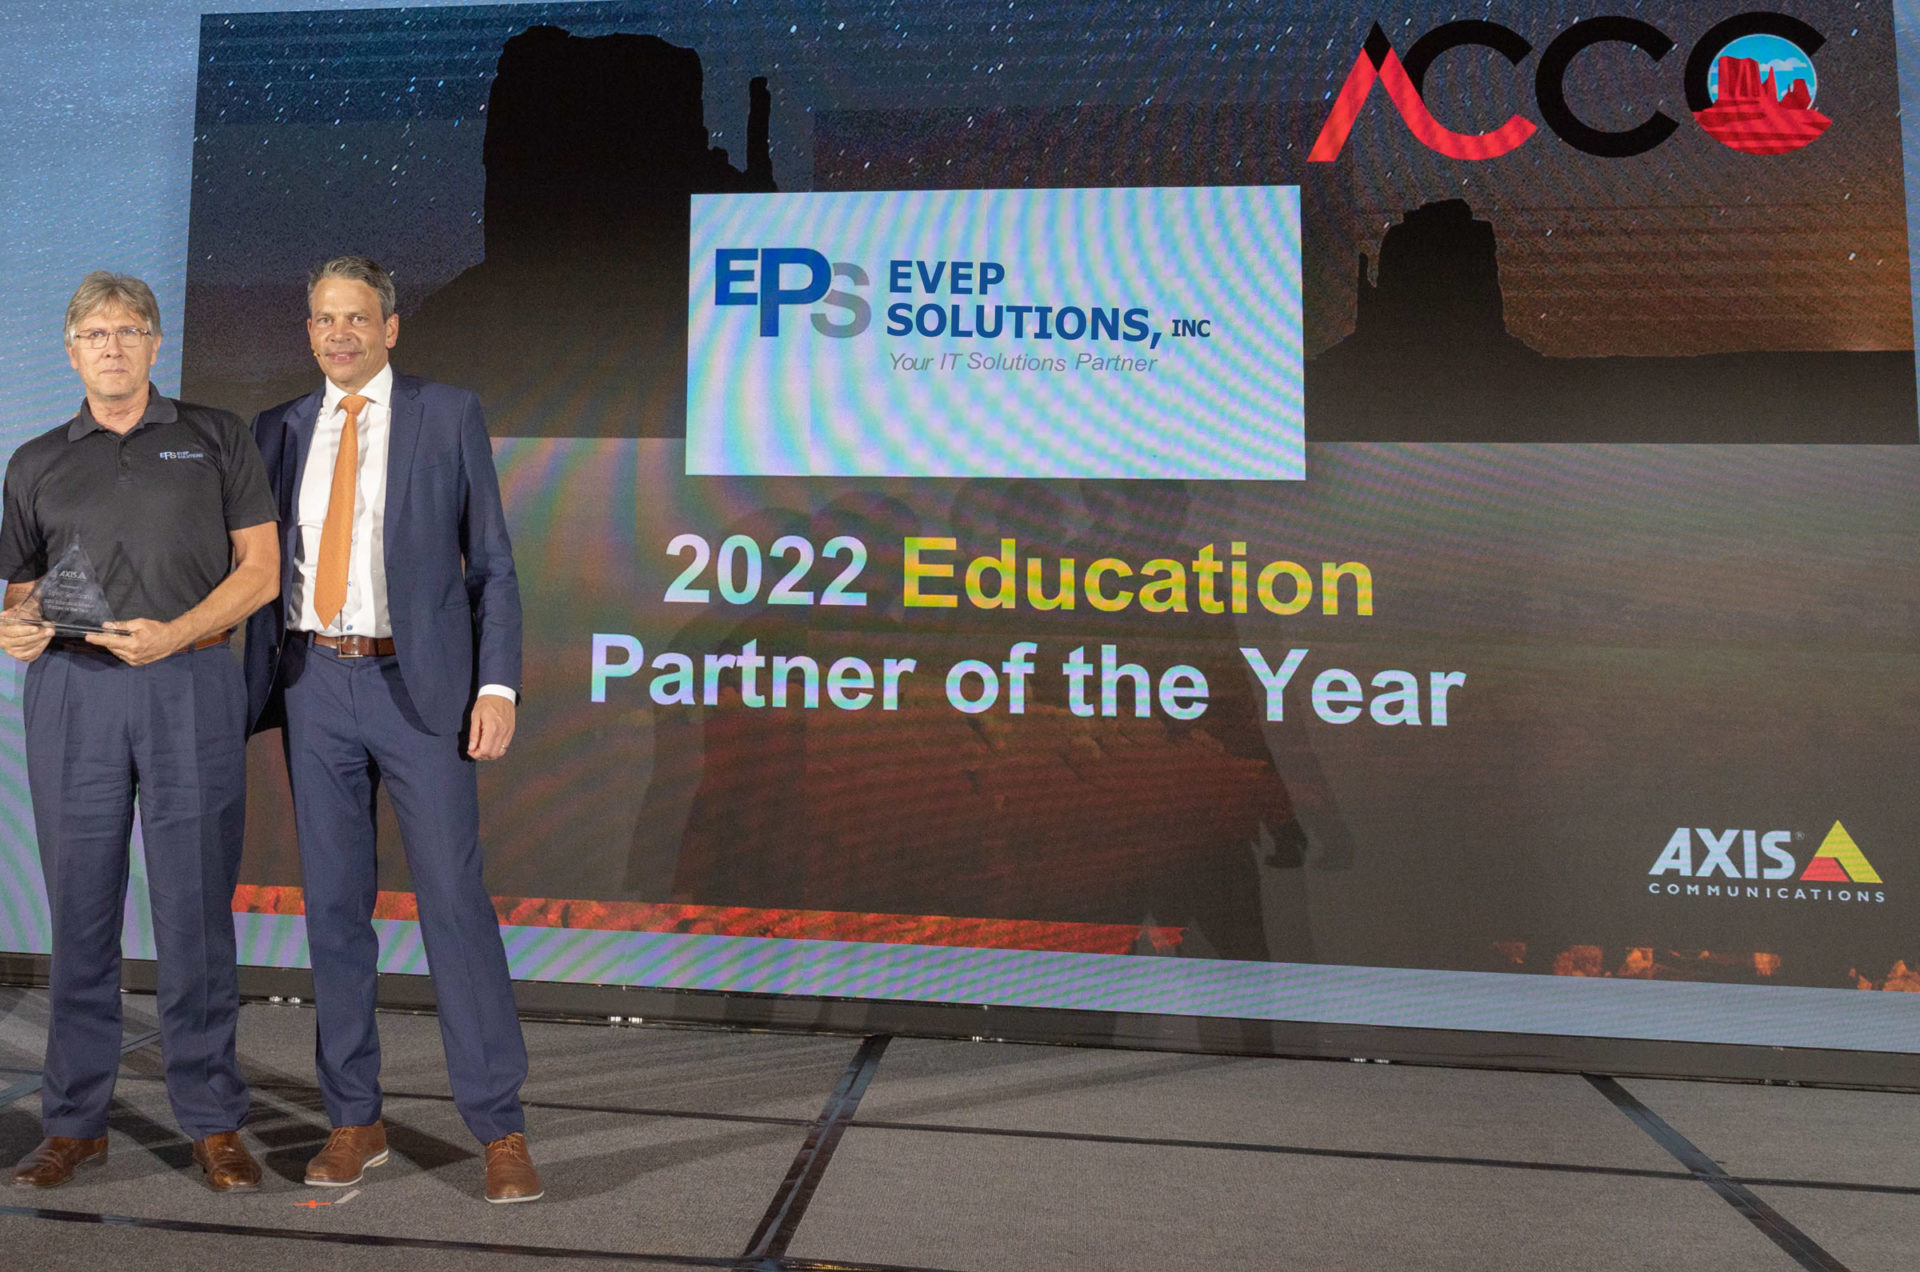 EYEP Solutions Inc, Education Partner of the Year for Axis in 2022.